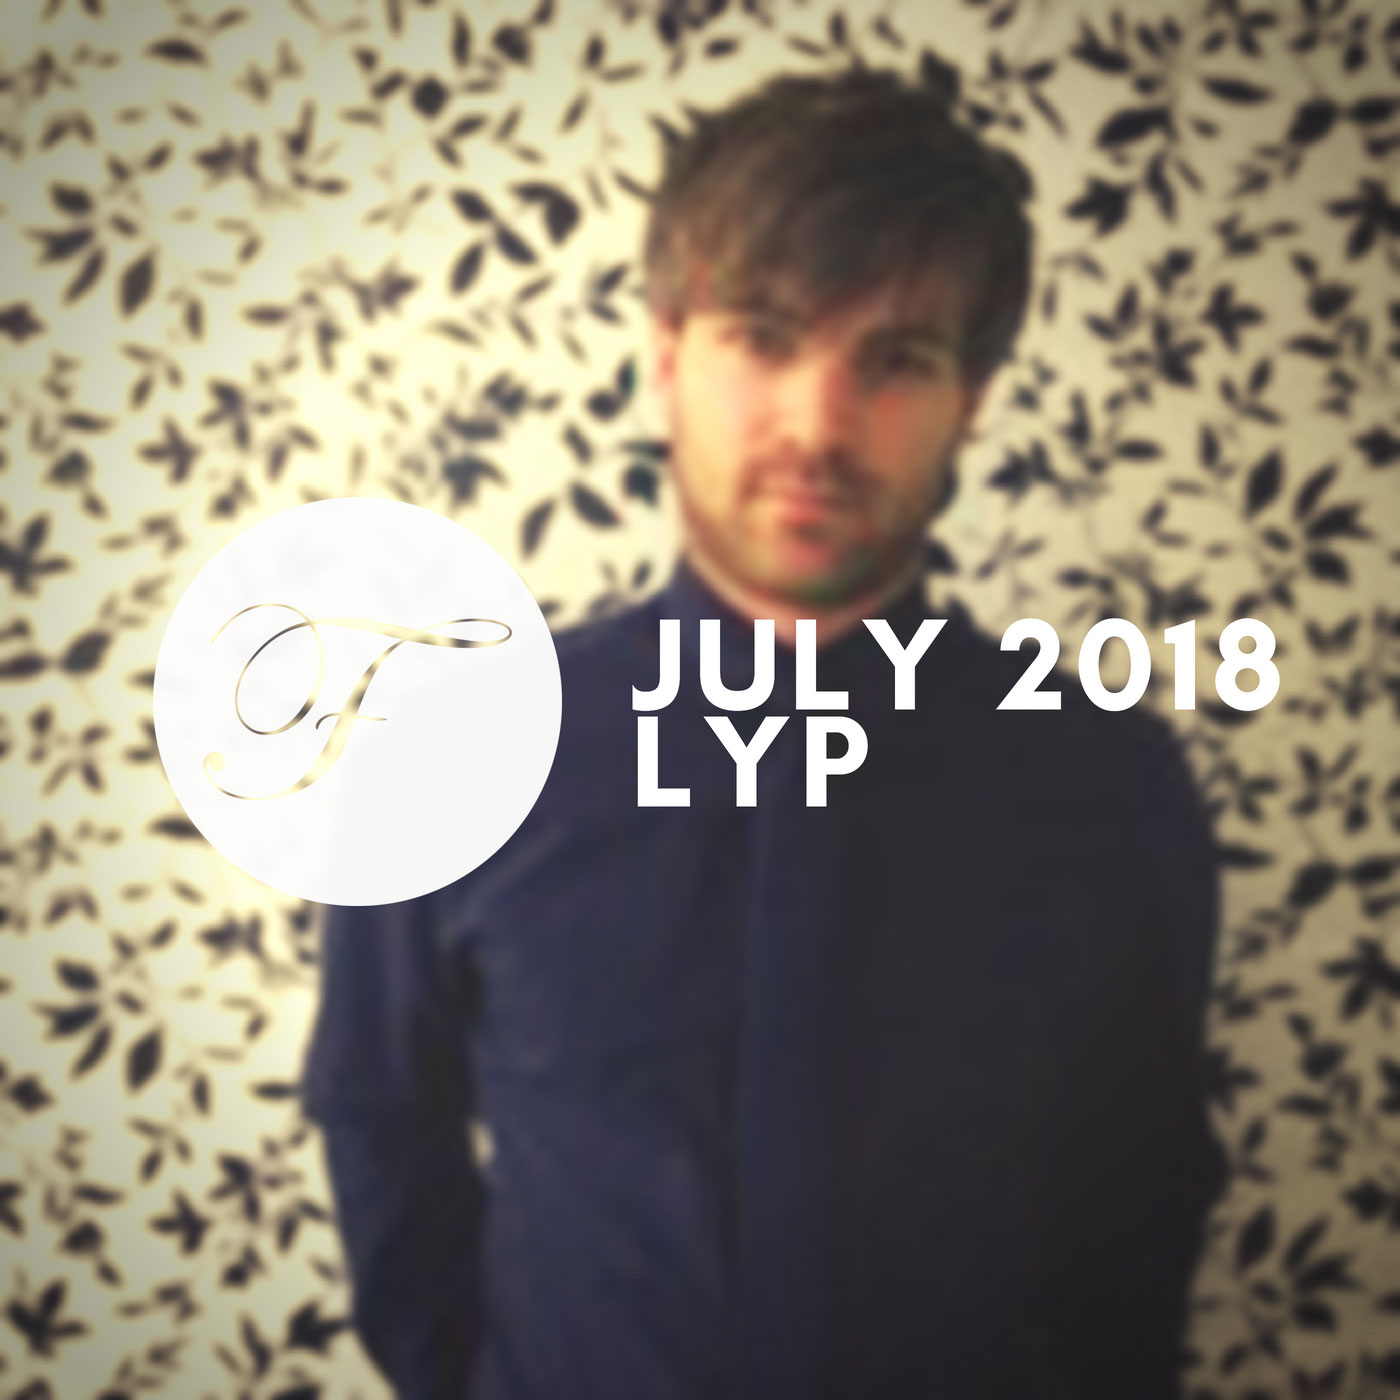 House Finesse 70 – July 2018 with LYP